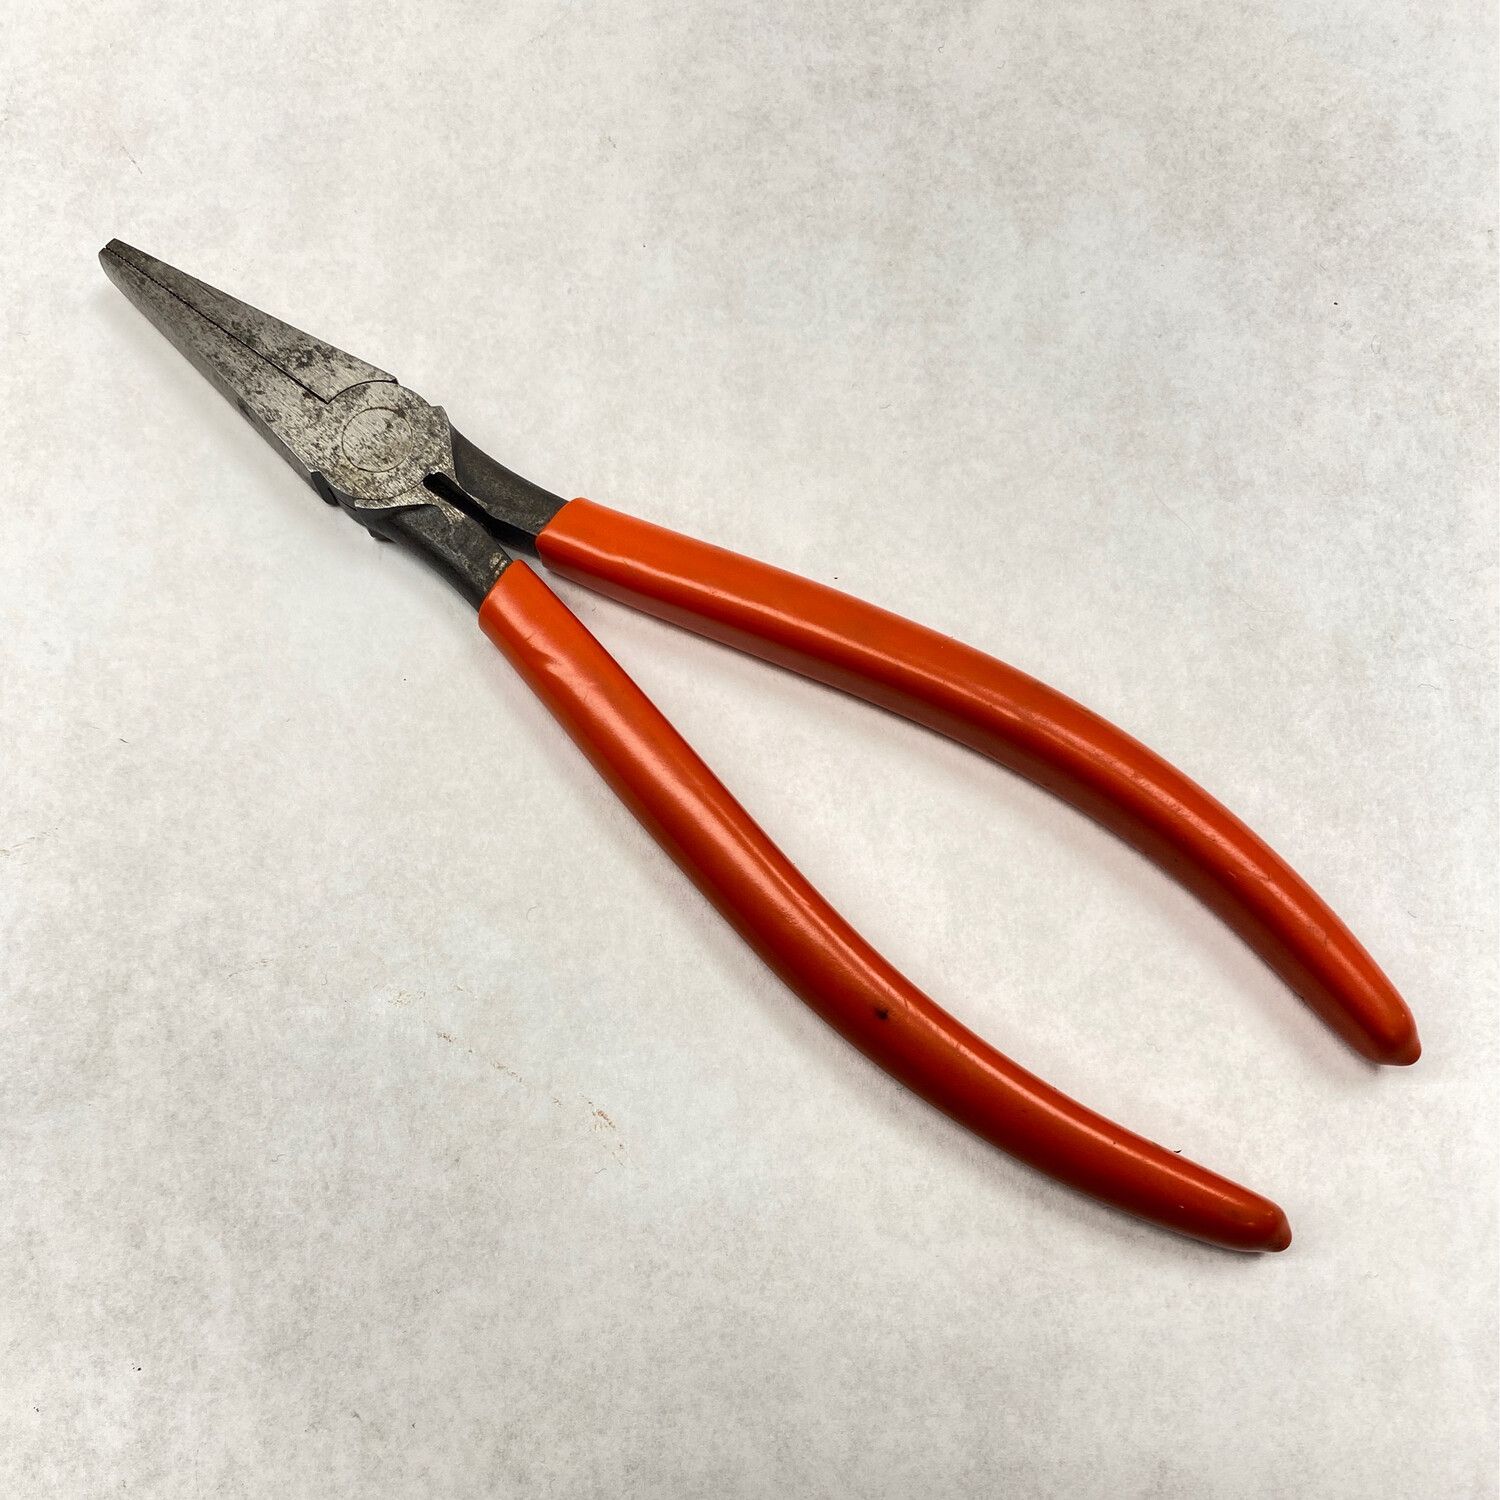 Armstrong 8” Duckbill Nose Pliers, 67-503